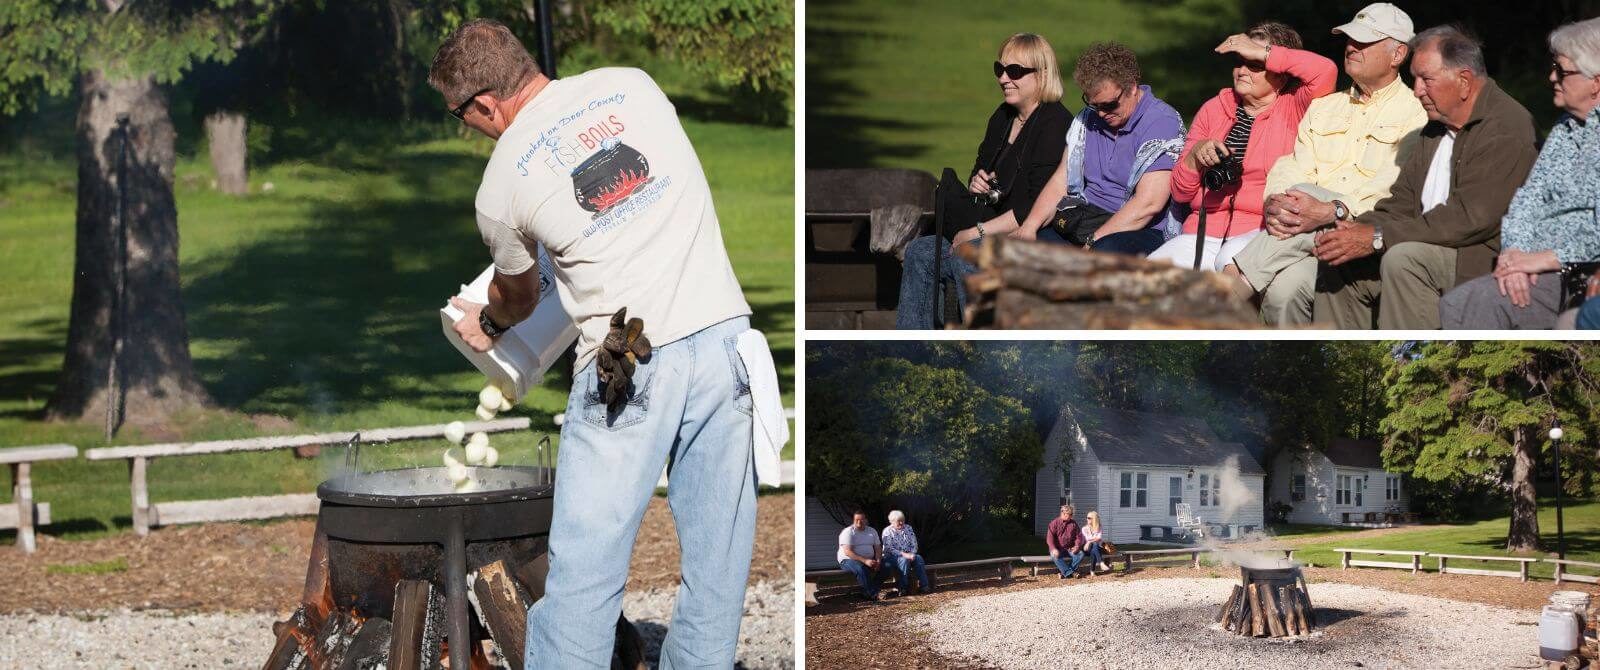 Collage of three different images showing people sitting by an outdoor fire pit